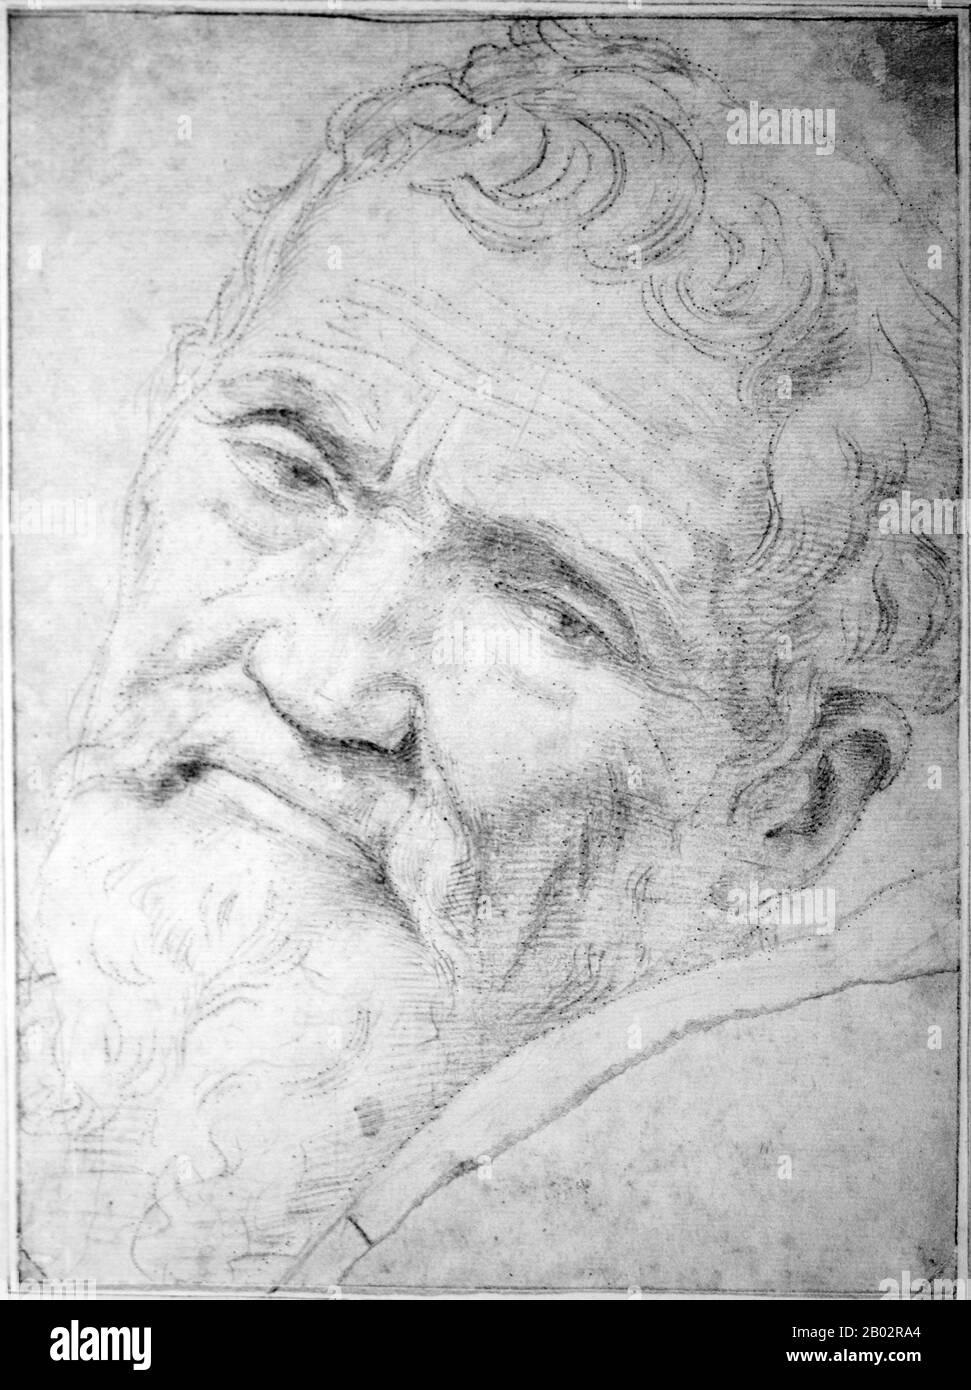 Michelangelo di Lodovico Buonarroti Simoni (6 March 1475 – 18 February 1564), commonly known as Michelangelo, was an Italian sculptor, painter, architect, poet, and engineer of the High Renaissance who exerted an unparalleled influence on the development of Western art.  Considered the greatest living artist in his lifetime, he has since been held as one of the greatest artists of all time. Despite making few forays beyond the arts, his versatility in the disciplines he took up was of such a high order that he is often considered a contender for the title of the archetypal Renaissance man, alo Stock Photo